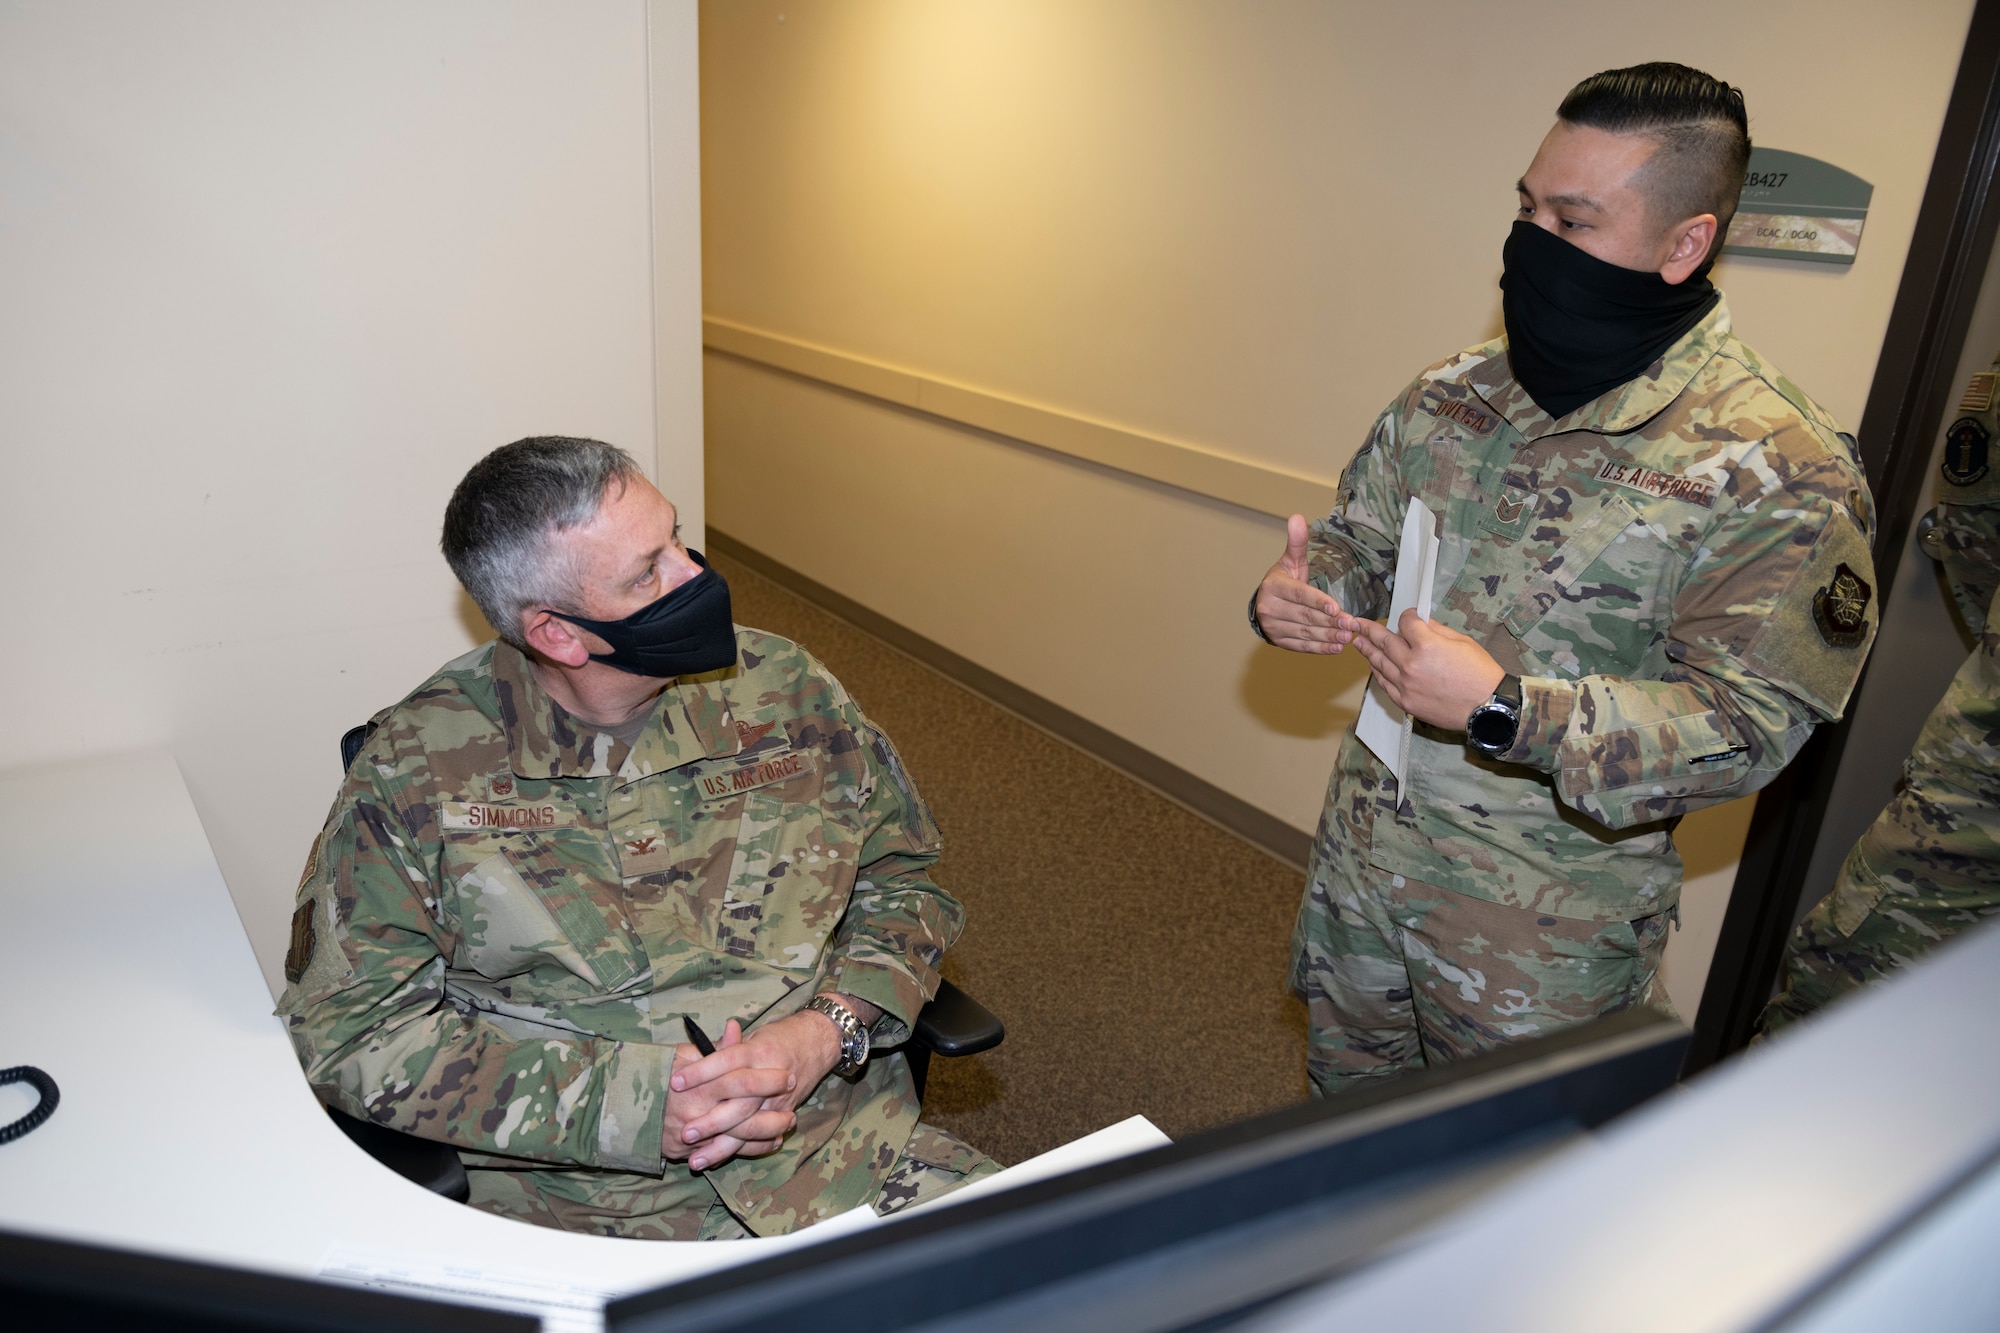 U.S. Air Force Tech Sgt. Michael de Vega, 60th Medical Support Squadron section chief of patient administration, guides Col. Corey Simmons, 60th Air Mobility Wing commander, through a death processing checklist during Leadership Rounds March 26, 2021, at Travis Air Force Base, California. The Leadership Rounds program provides 60th AMW leadership an opportunity to interact with Airmen and receive a detailed view of each mission performed at Travis AFB. (U.S. Air Force photo by Senior Airman Cameron Otte)